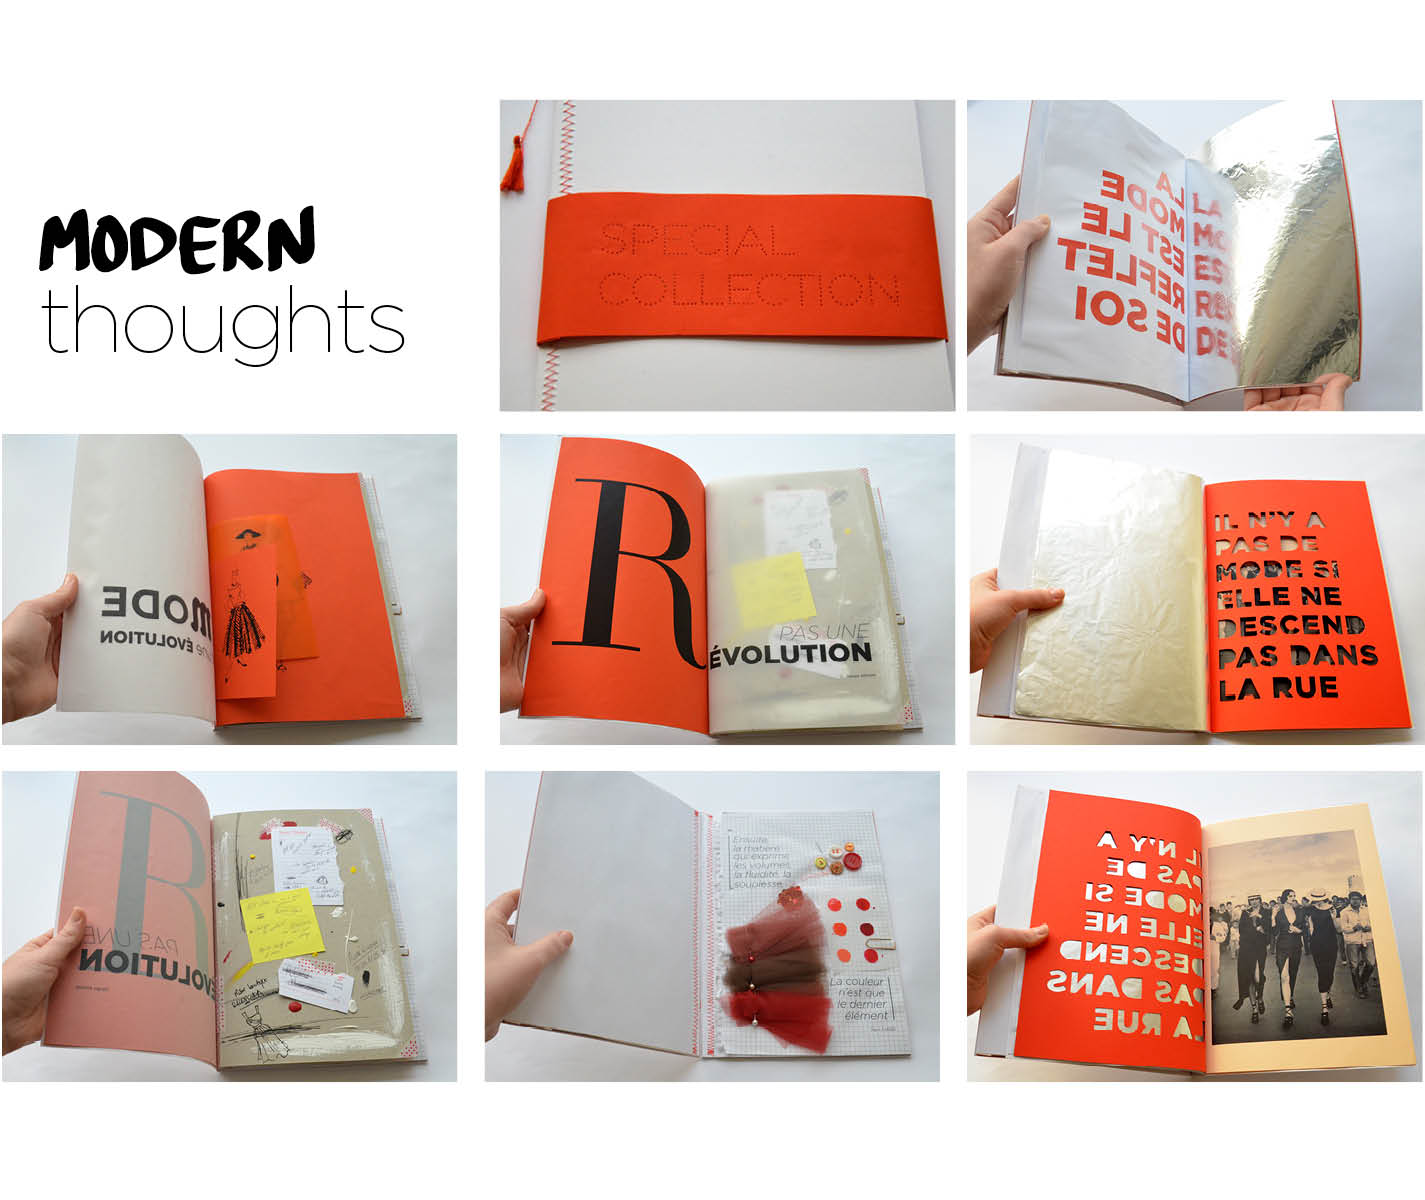 Modern thoughts - Editorial